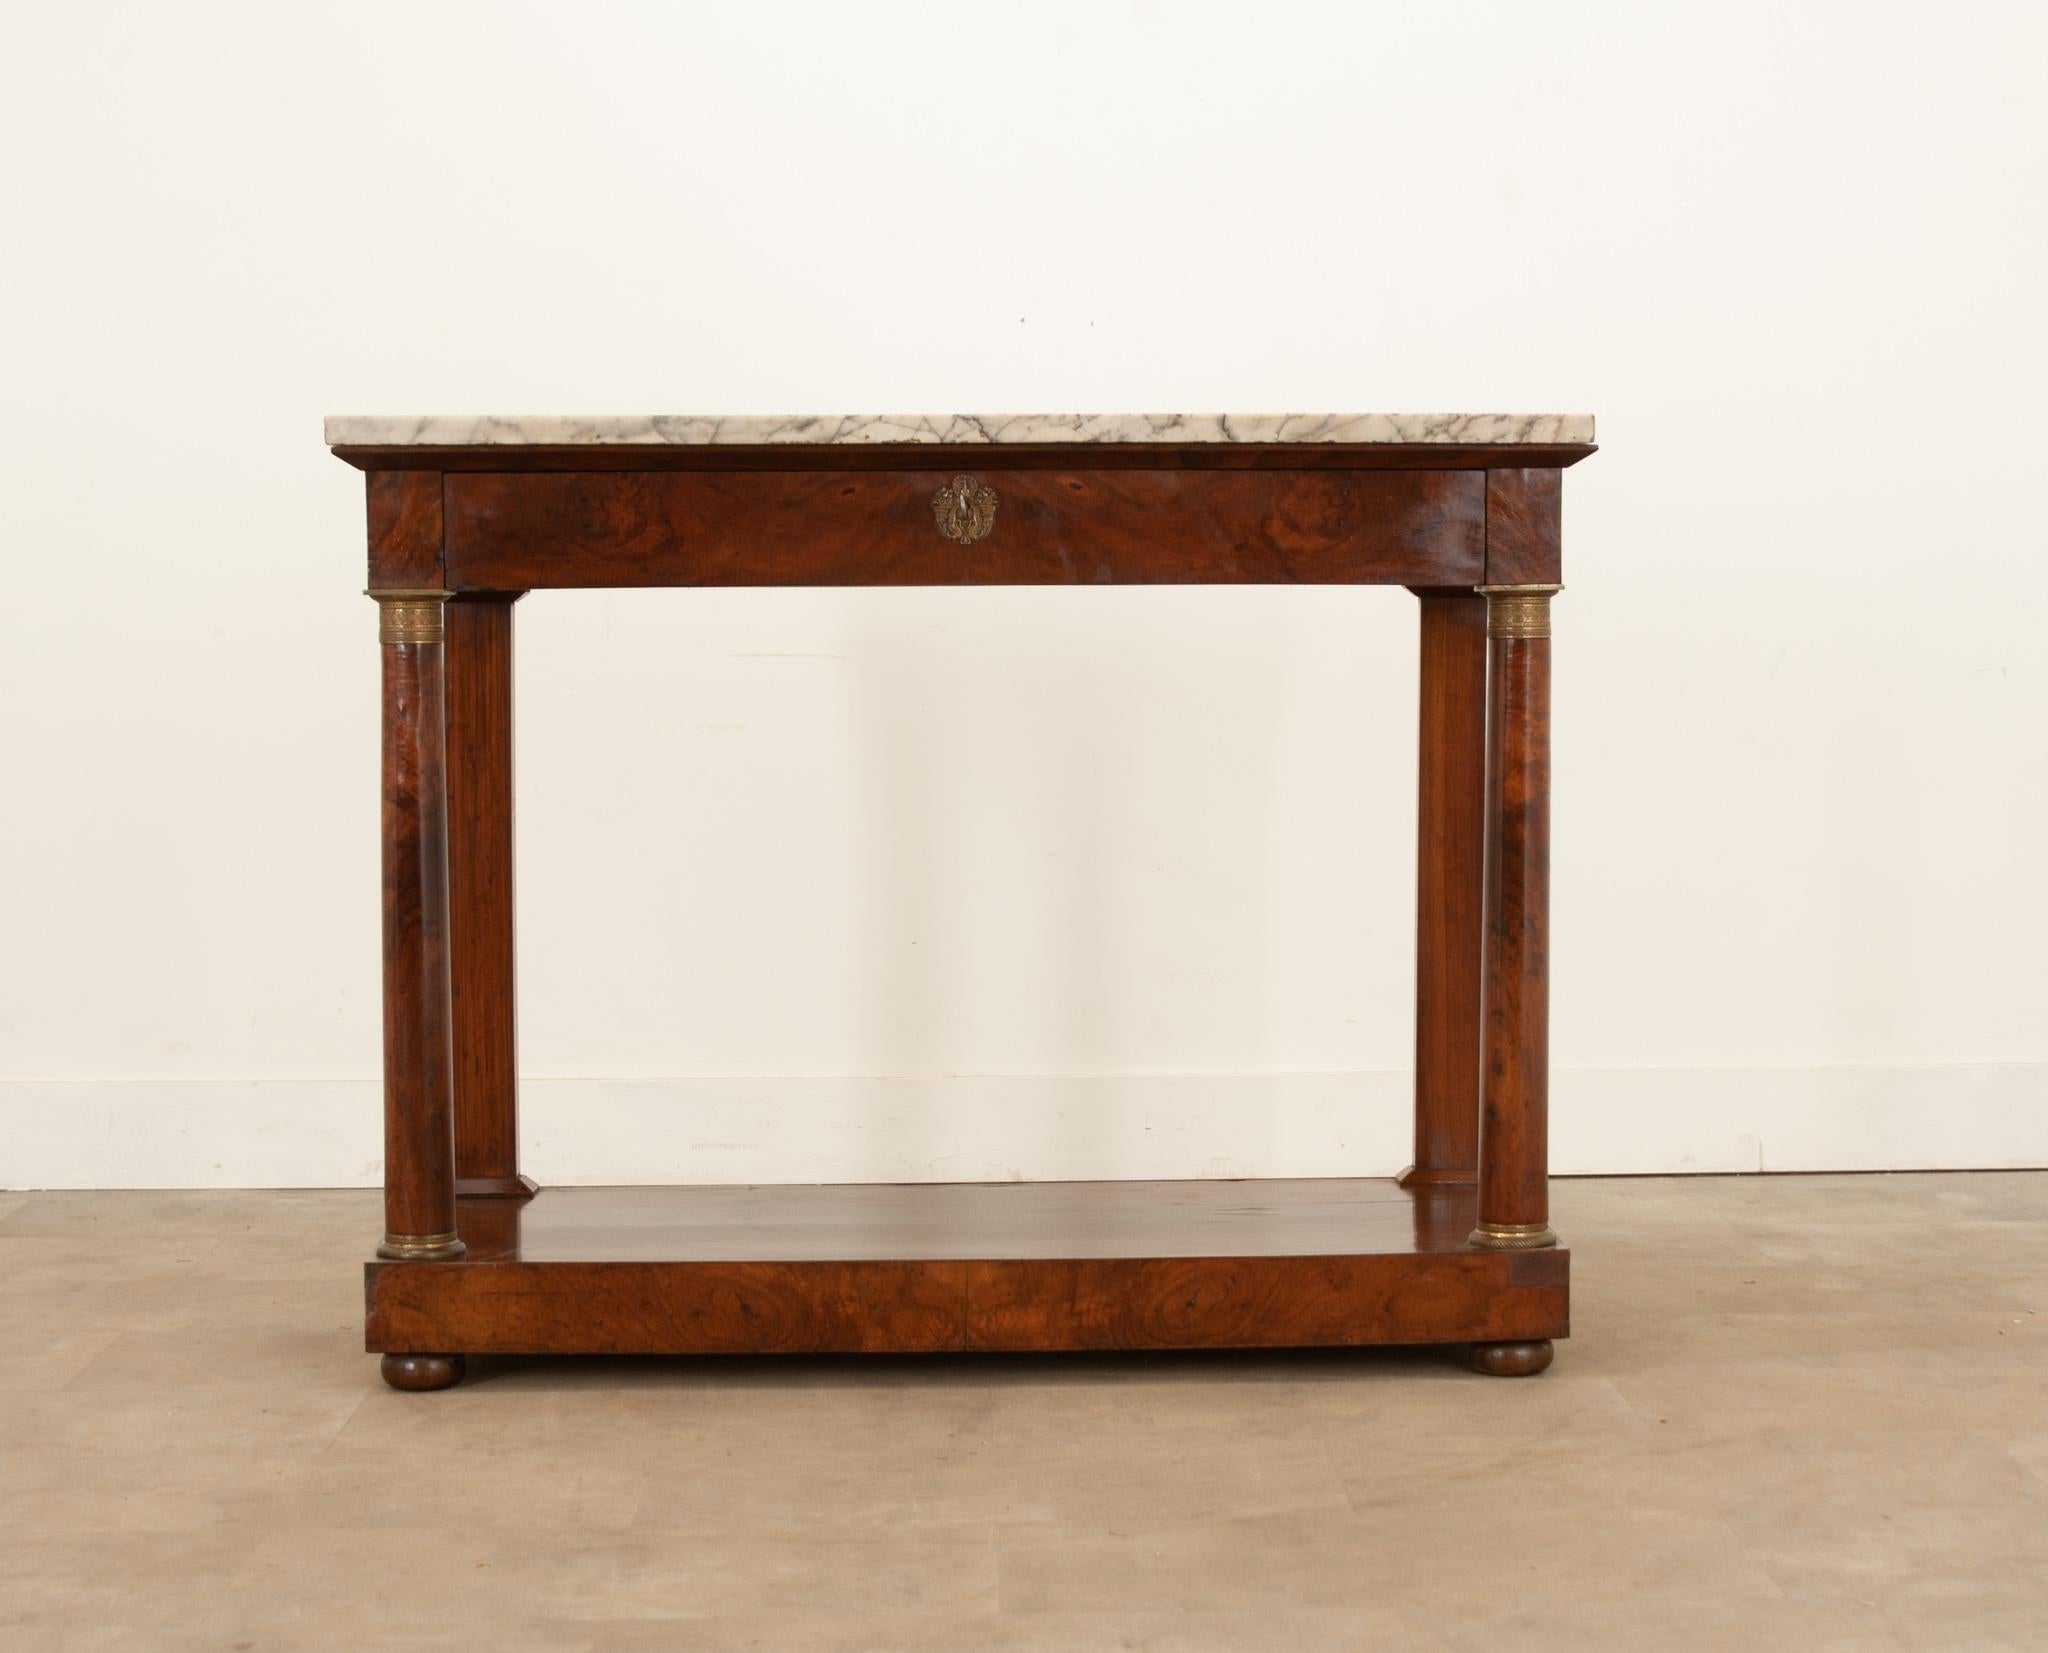 Hand-Crafted French 19th Century Mahogany Empire Console